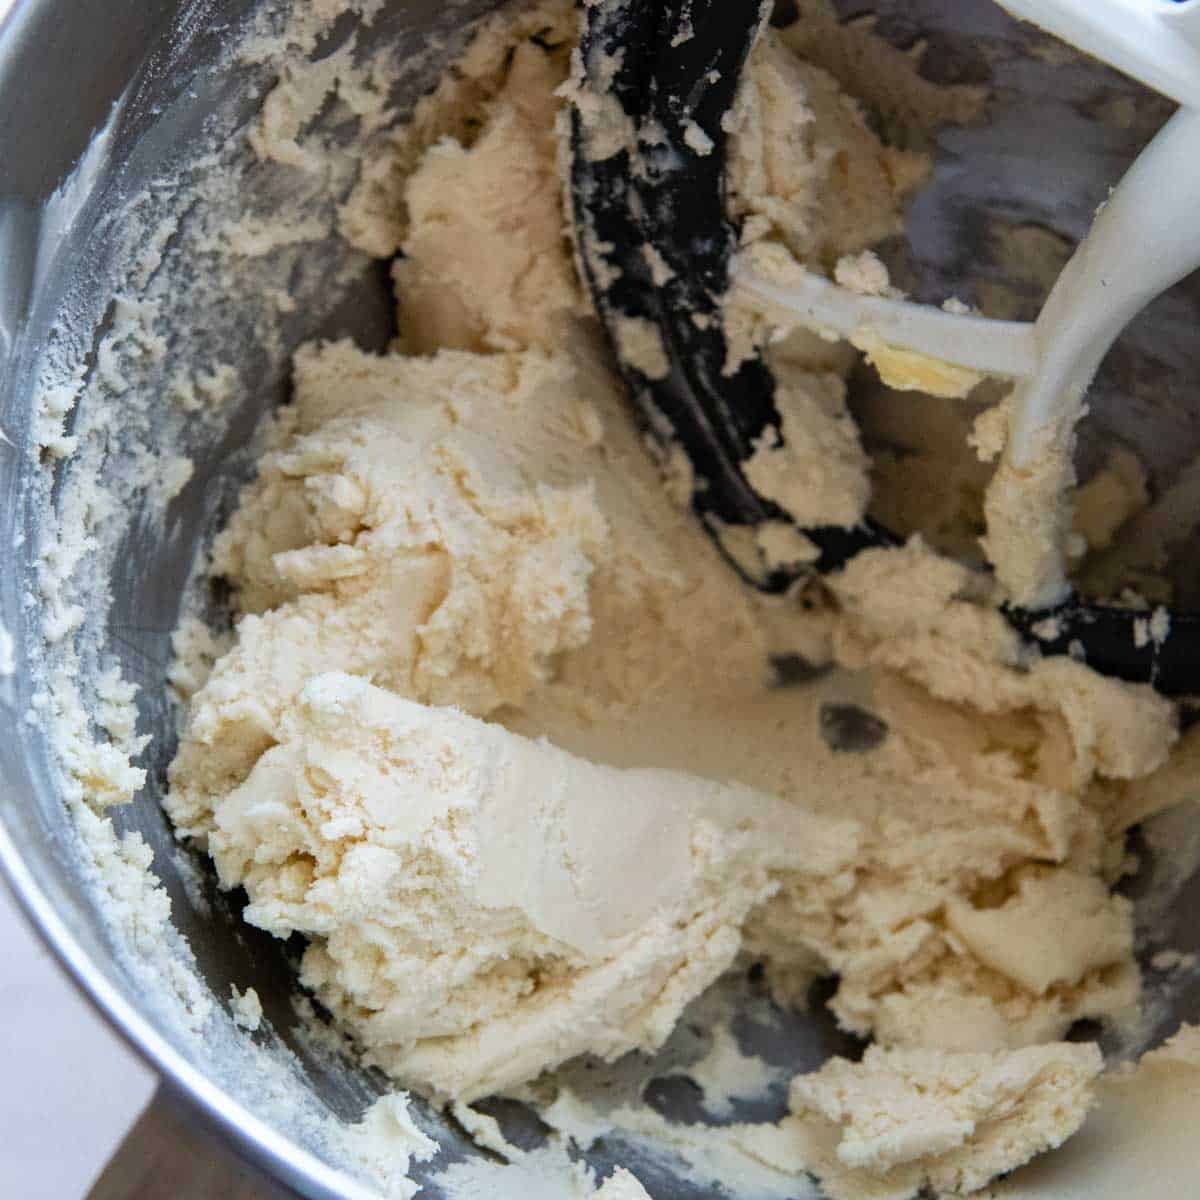 dough after mixing with flour.